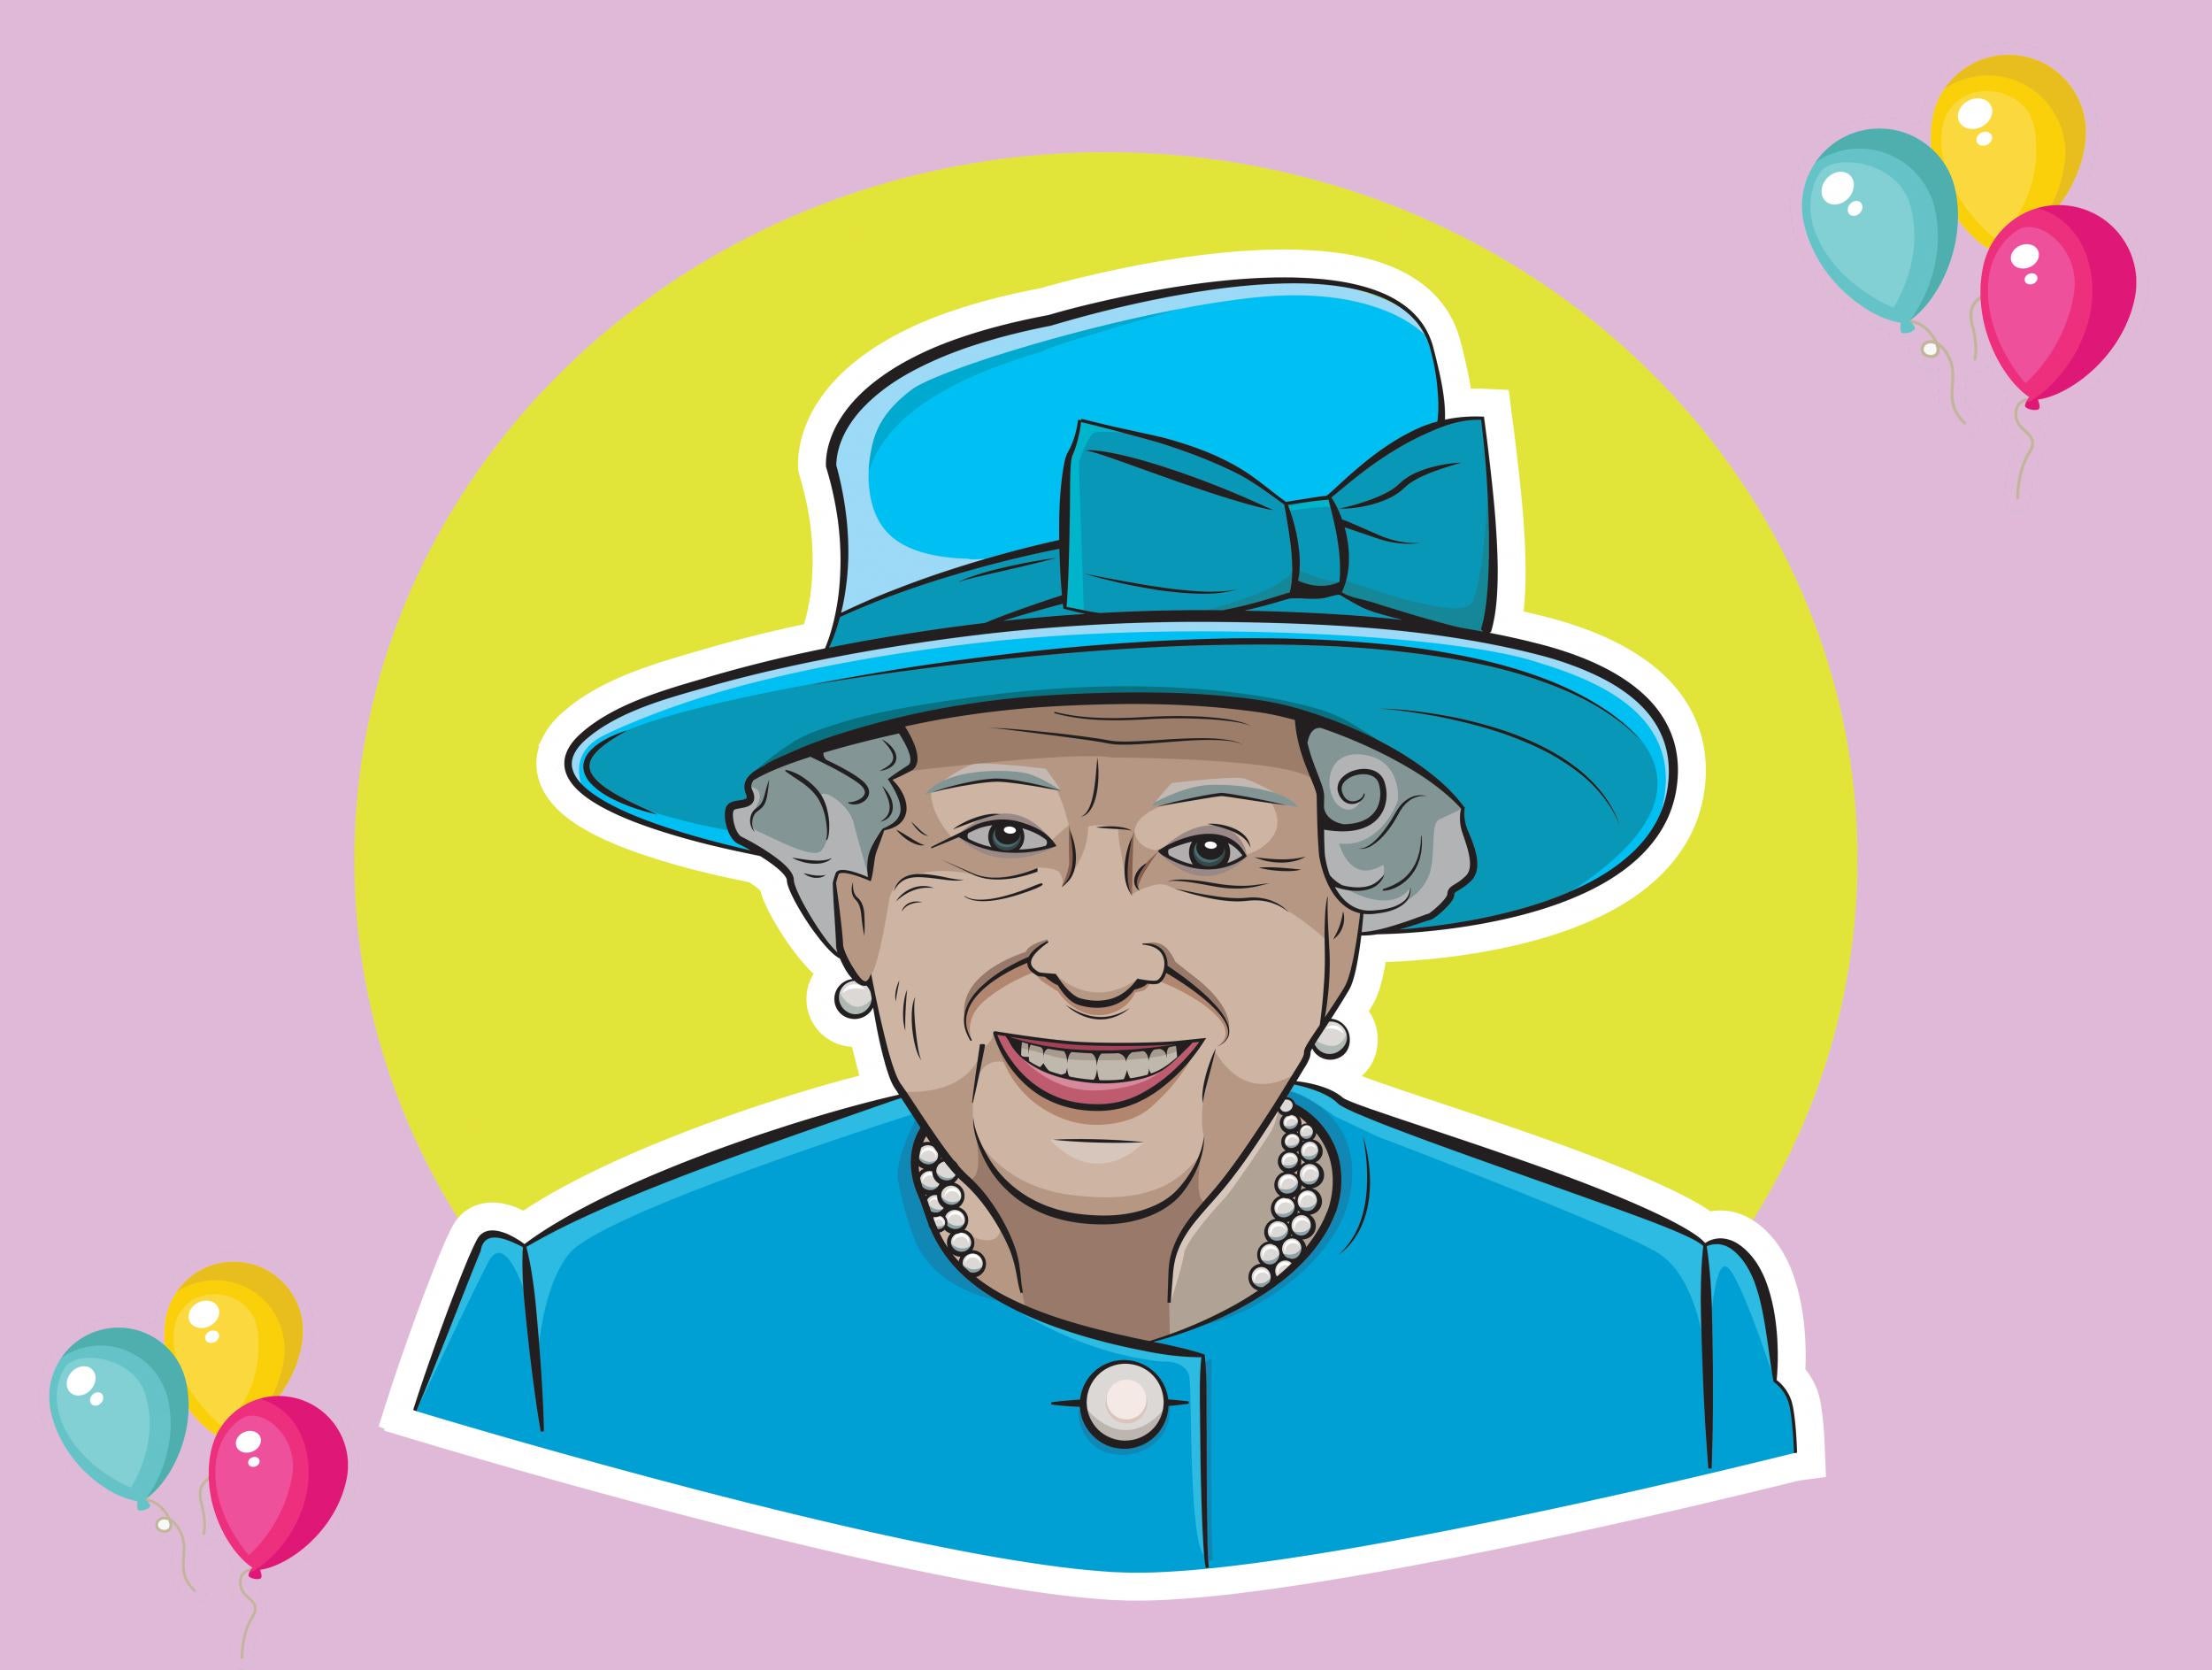 As the Queen celebrates her 94th birthday, here's our gift ideas for people in their nineties